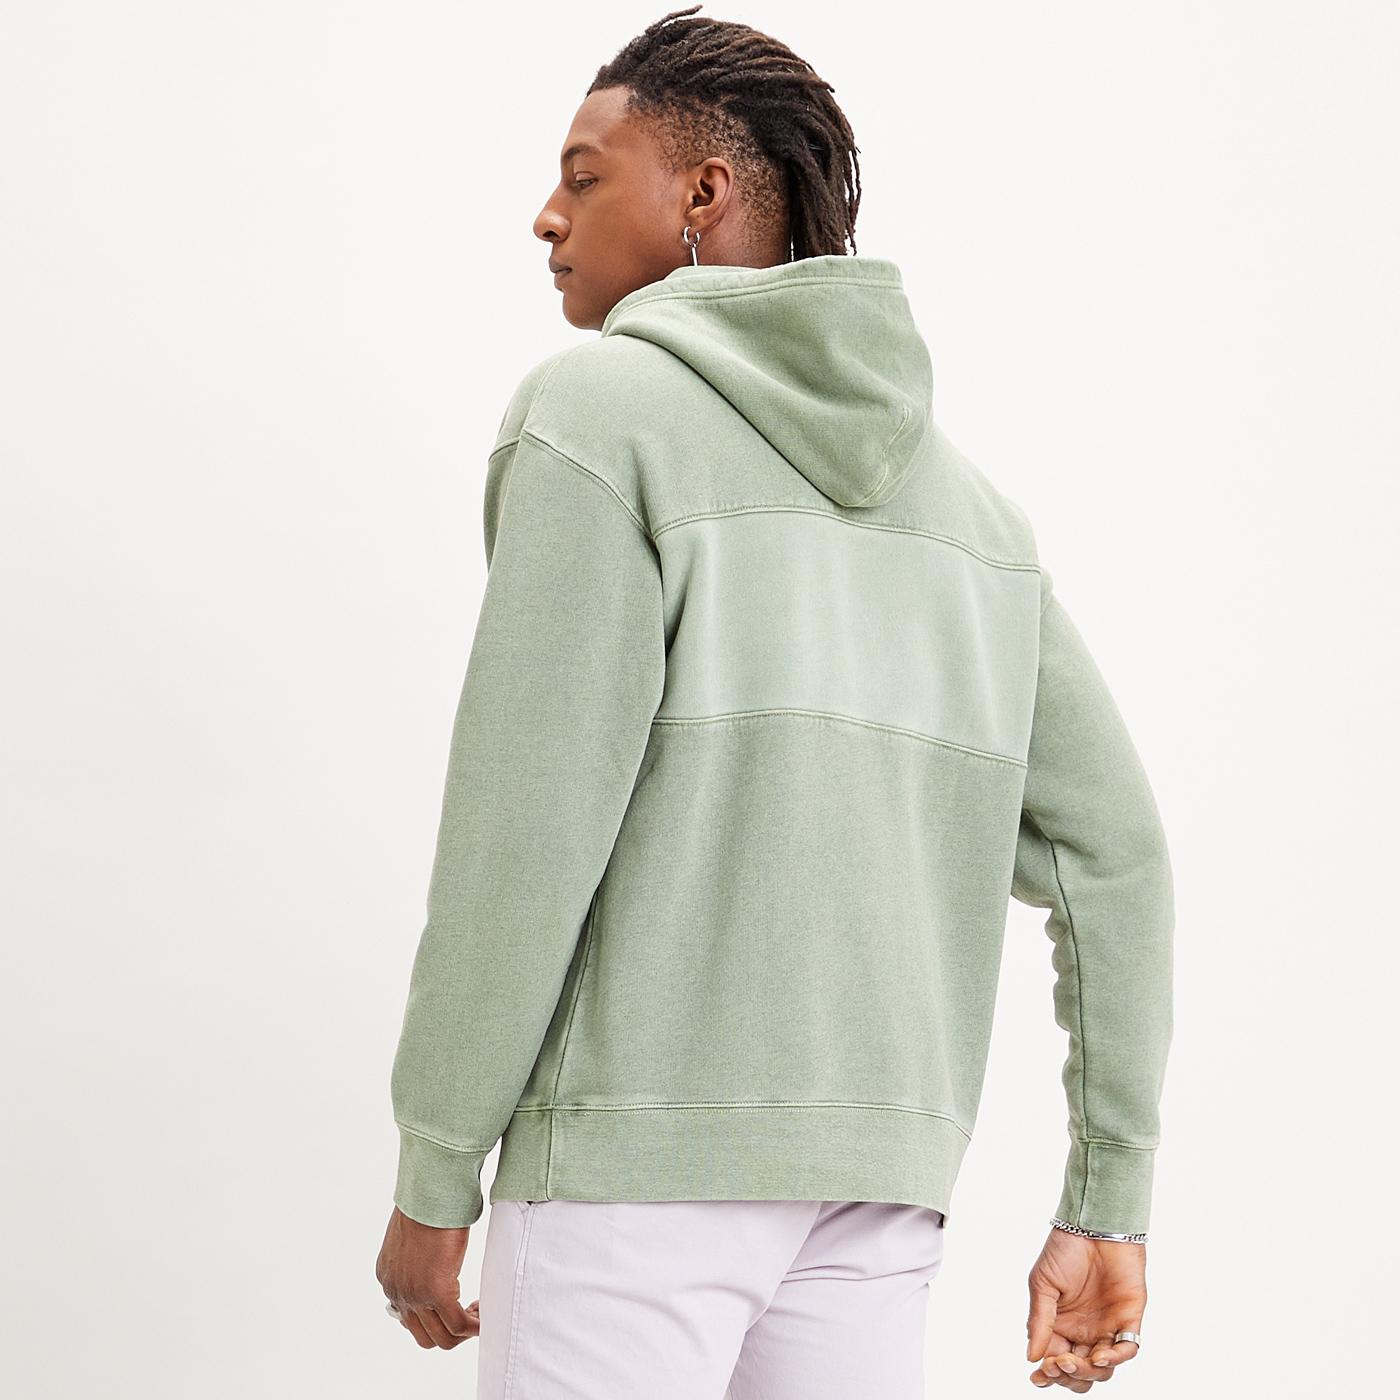 LEVI'S Men's Relaxed Fit Retro Novelty Hoodie in Hedge Green